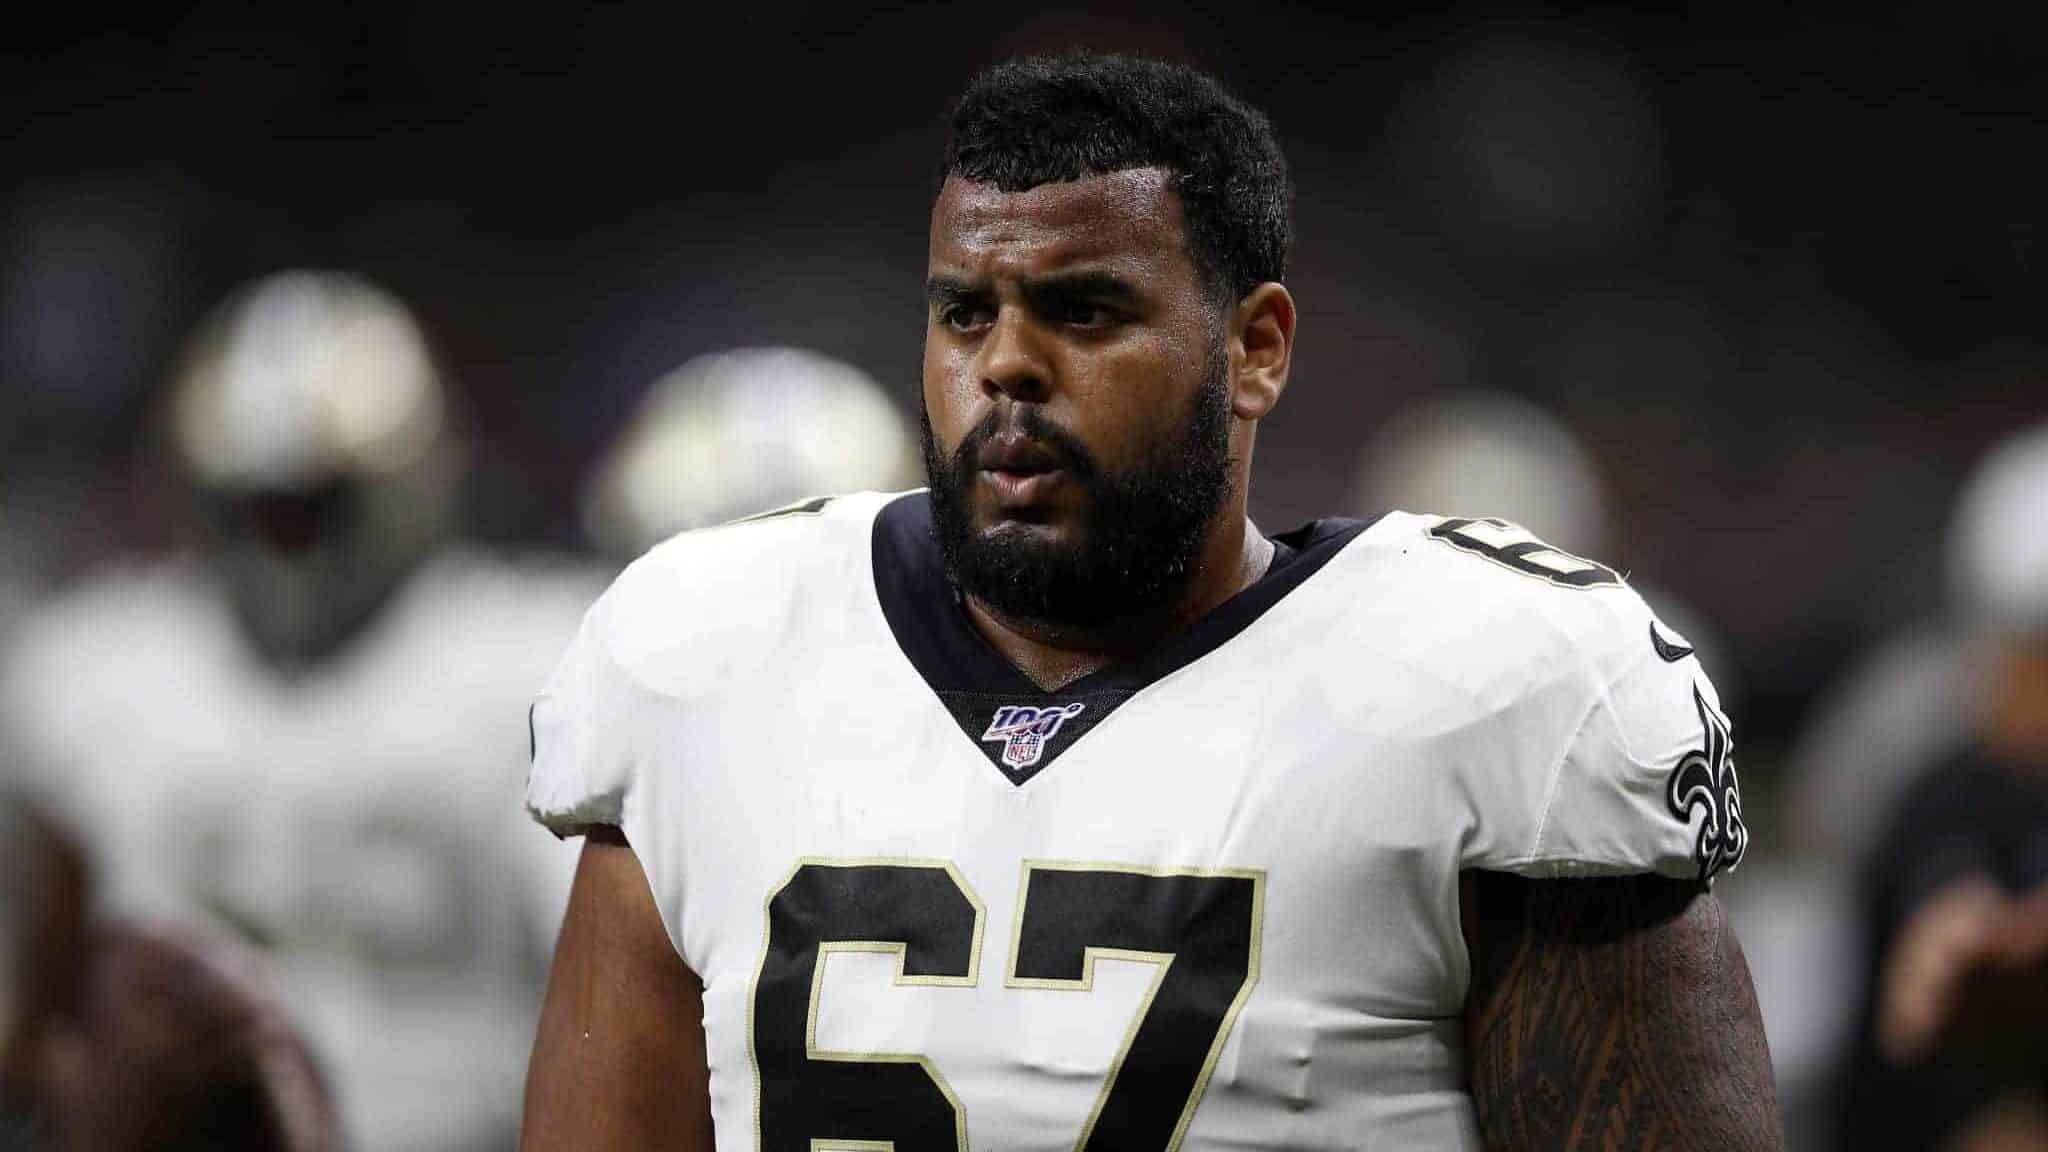 NEW ORLEANS, LOUISIANA - AUGUST 09: Larry Warford #67 of the New Orleans Saints during a preseason game at the Mercedes Benz Superdome on August 09, 2019 in New Orleans, Louisiana. New York Jets